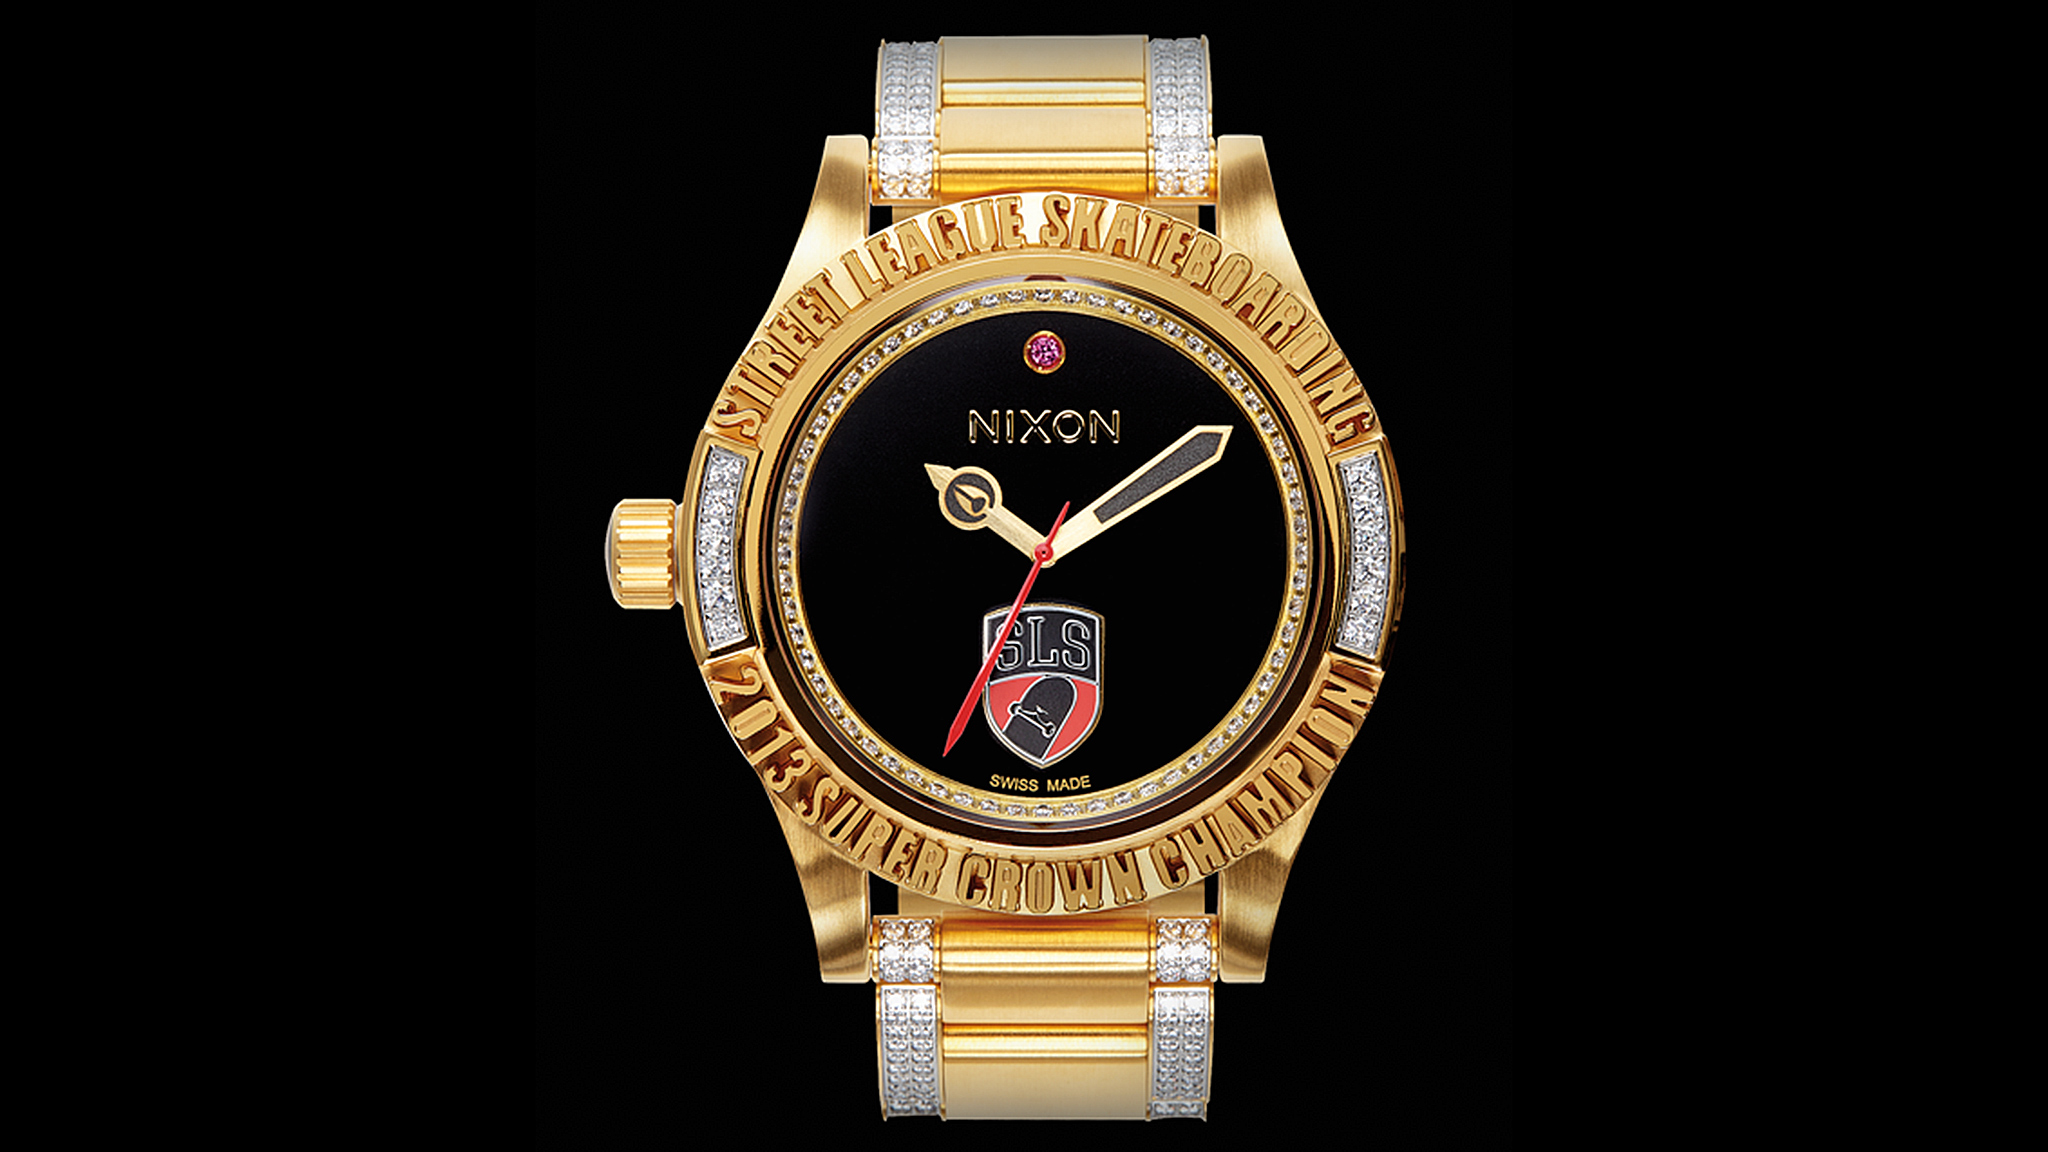 Nixon's 20,000 watch, set with over 60 diamonds, for the Super Crown champ Chris Cole.